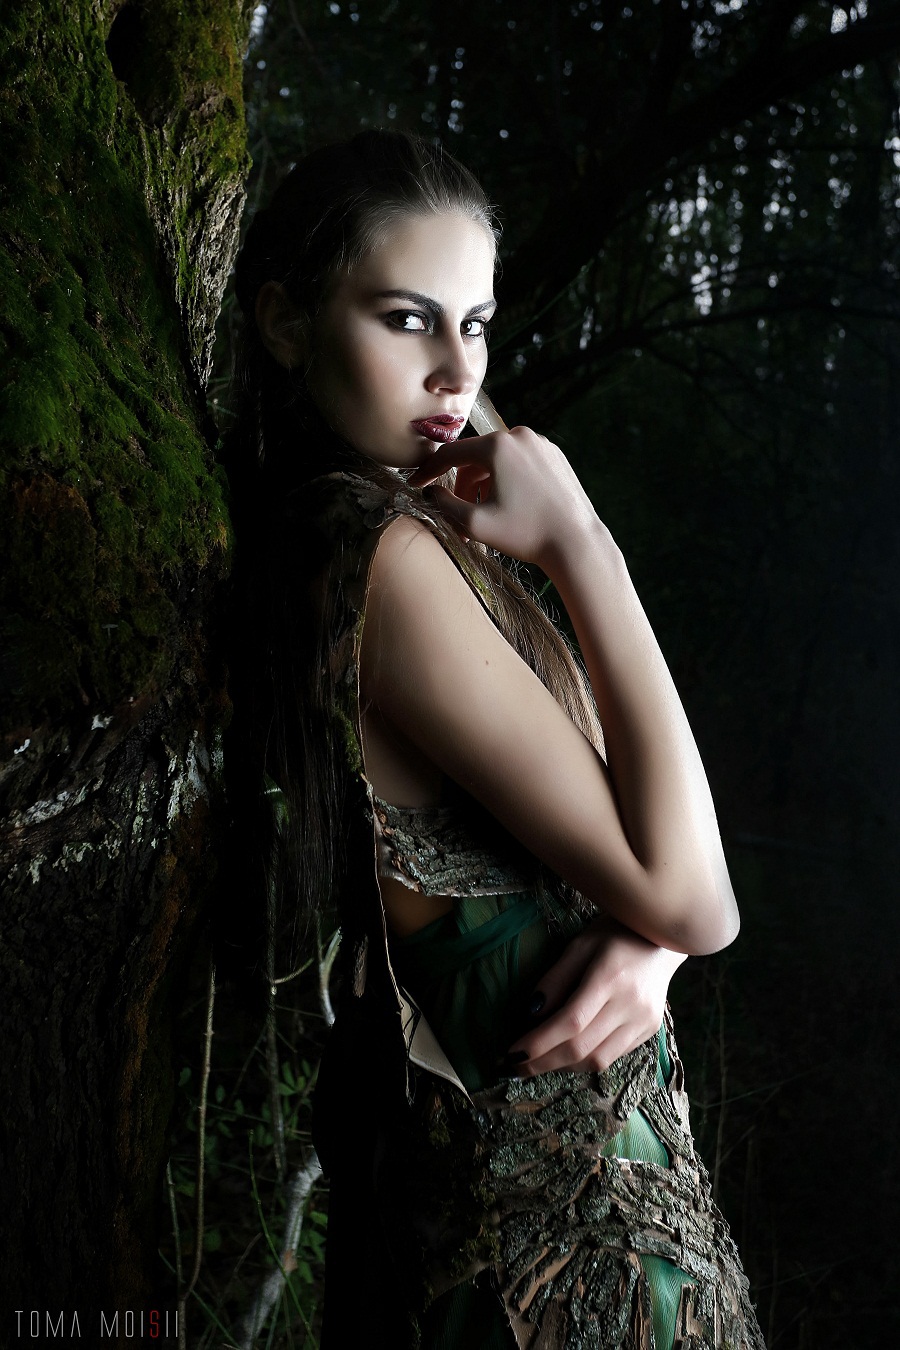 Haute couture editorial concept clothing fashion photography Toma Moisii norse mythology goddess viking norway Character